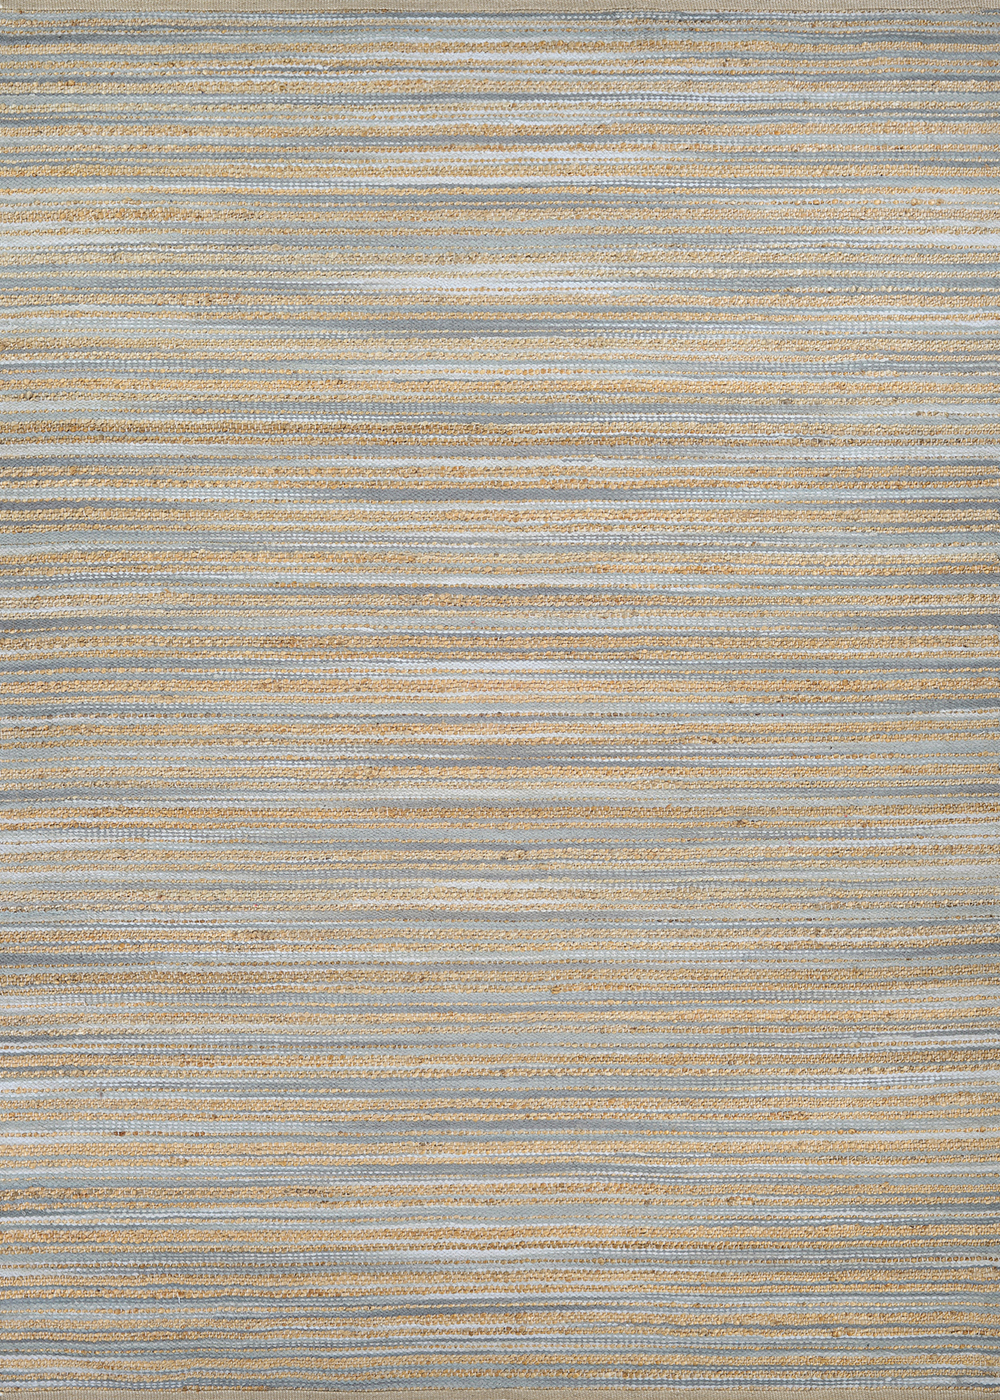 Couristan NATURE'S ELEMENTS LODGE STRAW/GREY Rug